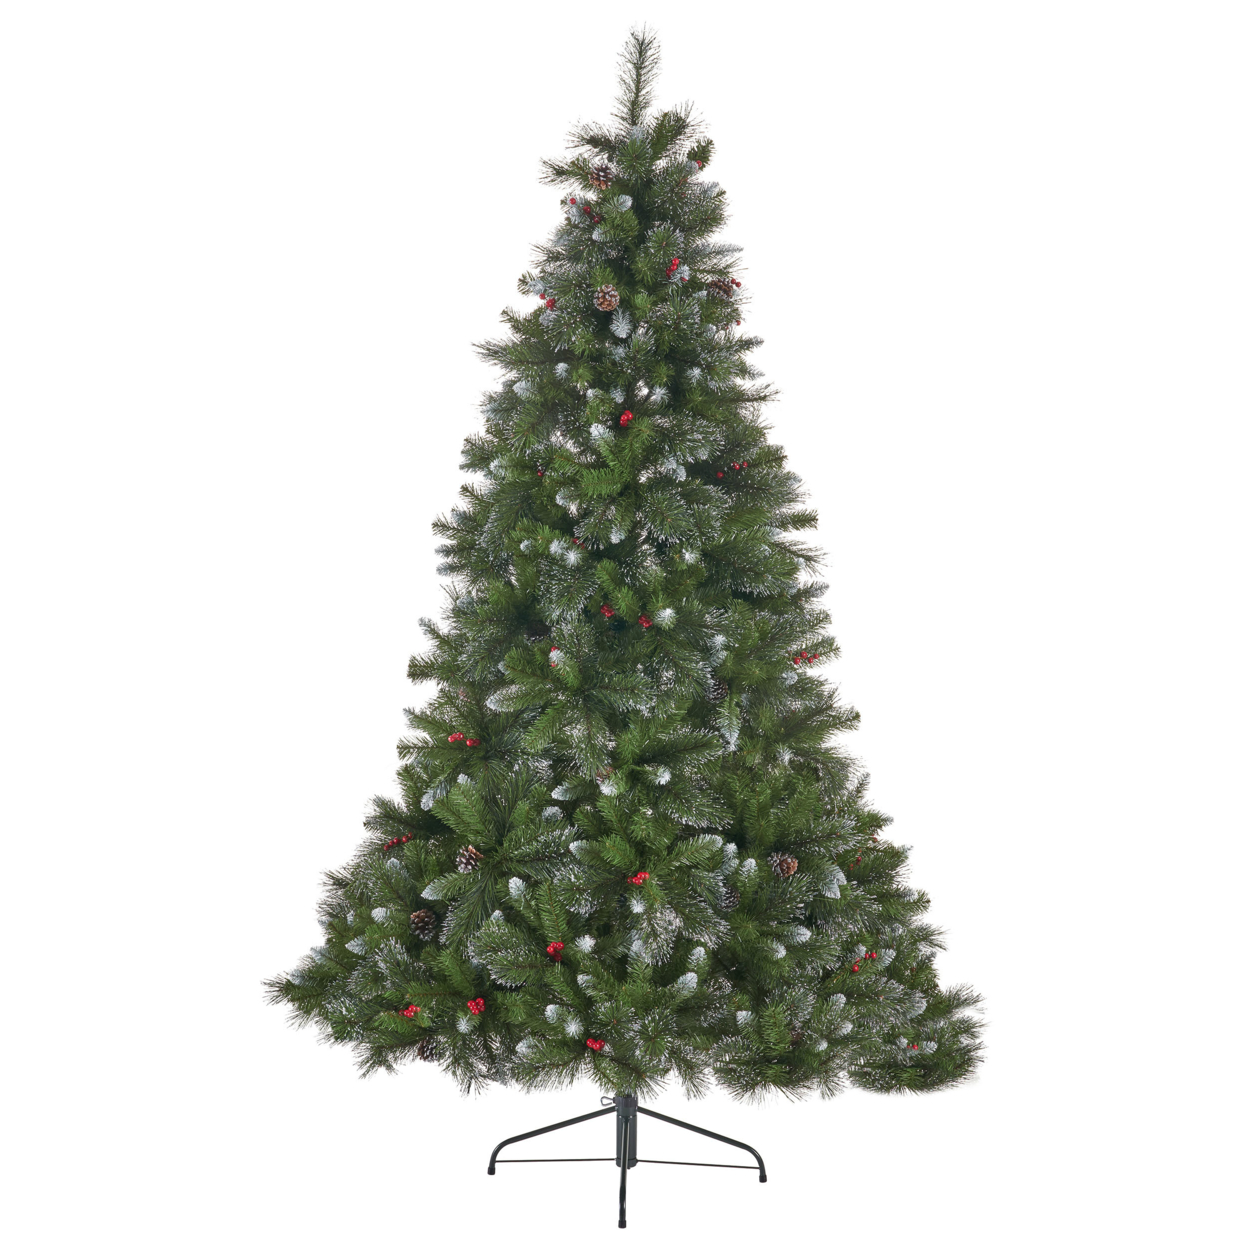 4.5-foot Mixed Spruce Pre-Lit Or Unlit Artificial Christmas Tree With Glitter Branches, Red Berries And Pinecones - Multicolor Lights